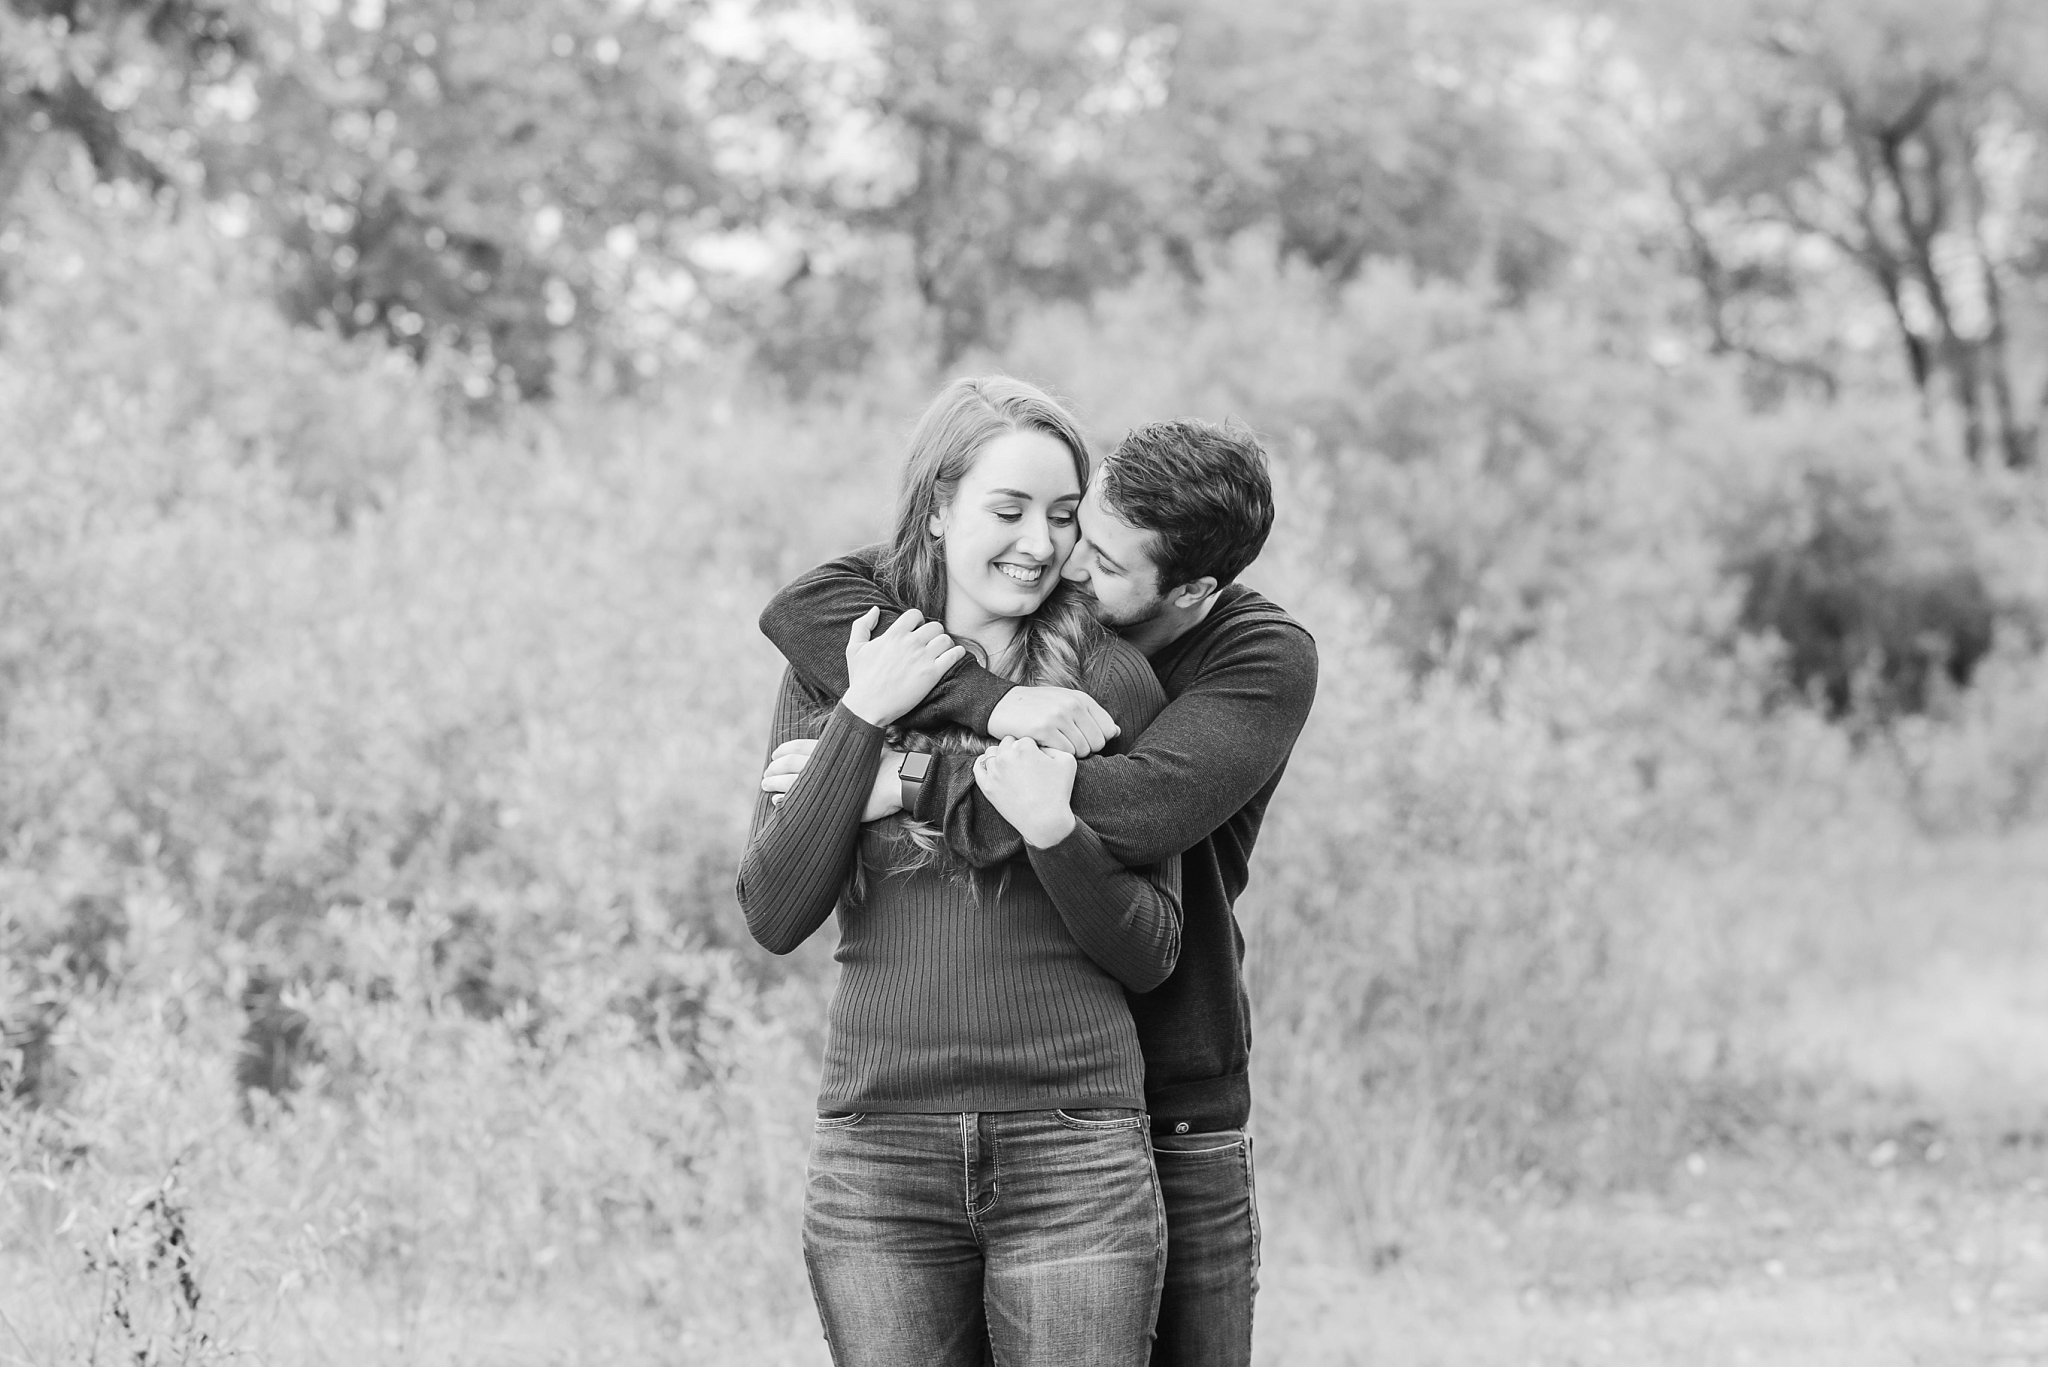 engagement session at fanshawe conservation area